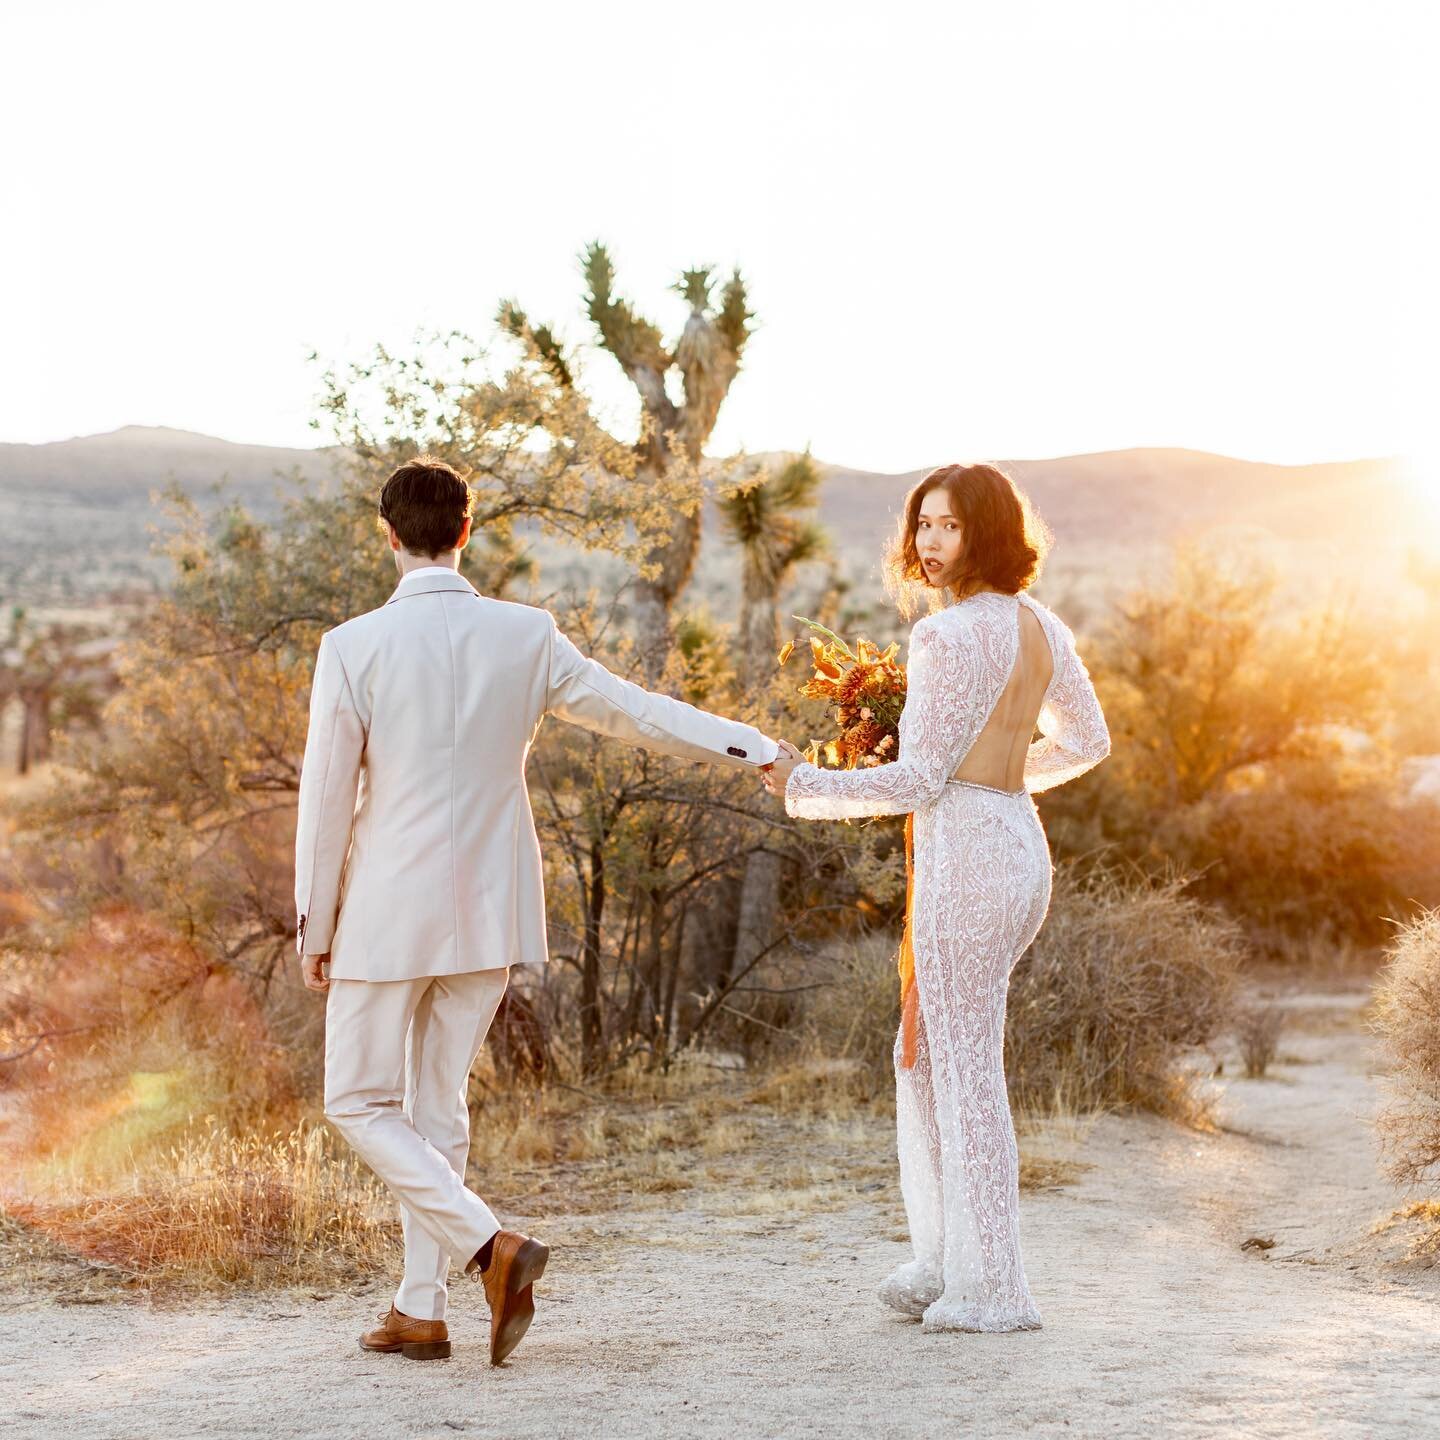 Tip # 6 for Wedding Day Timelines:

Last but not least at all.  When planning your wedding day, start with the sunset!  I know that sounds crazy, but golden hour is a real thing, and it&rsquo;s worth working around. Whatever moments/ photos you are m